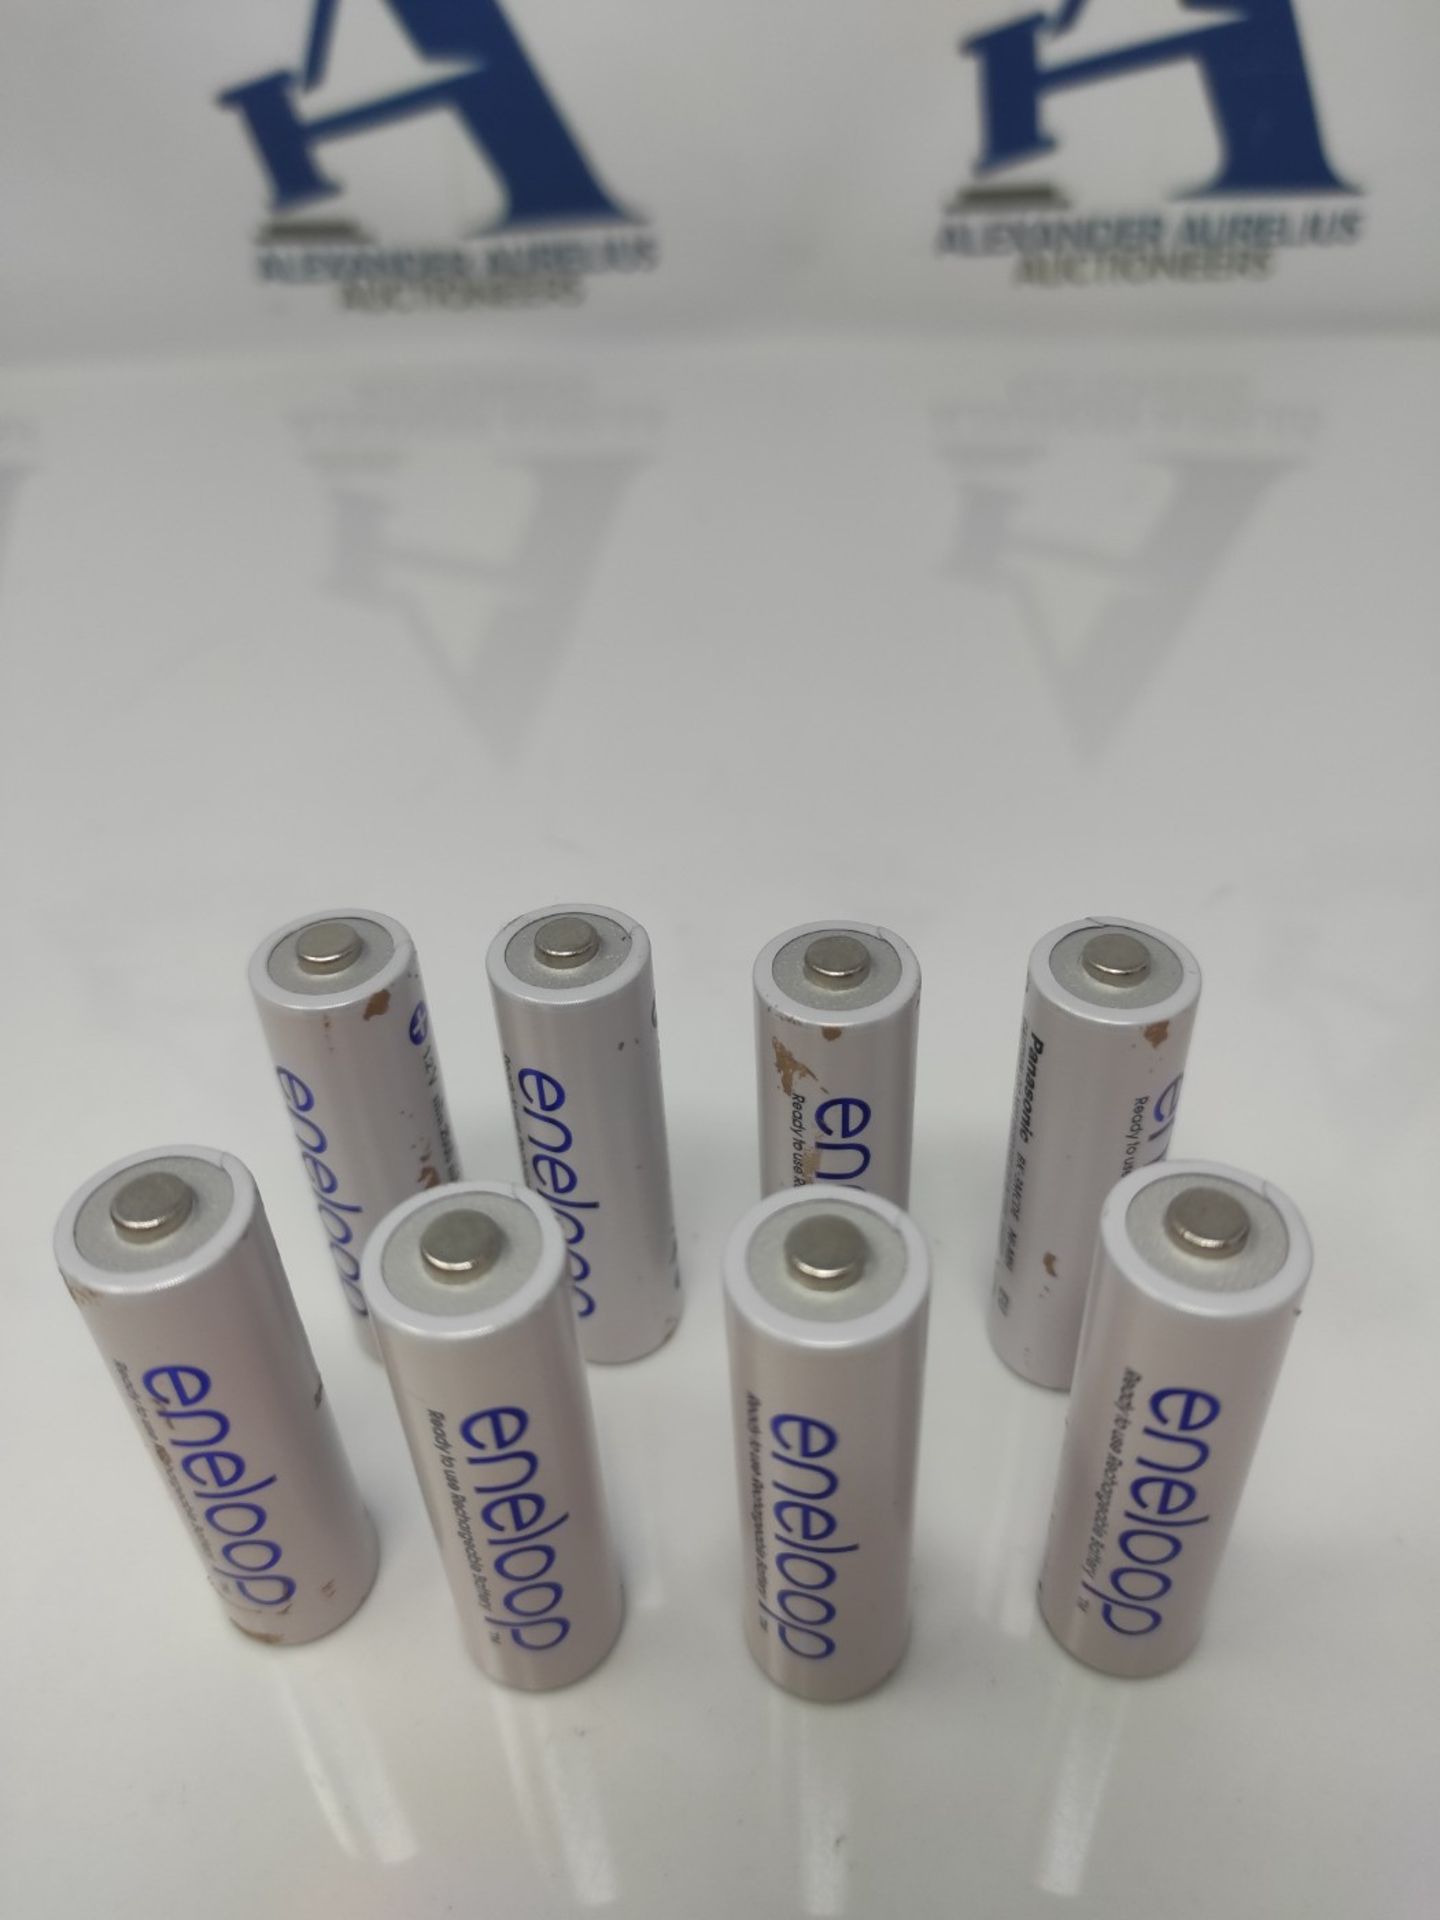 Panasonic eneloop AA/Mignon, 8-pack, Ready-to-Use NiMH batteries, improved capacity wi - Image 2 of 2